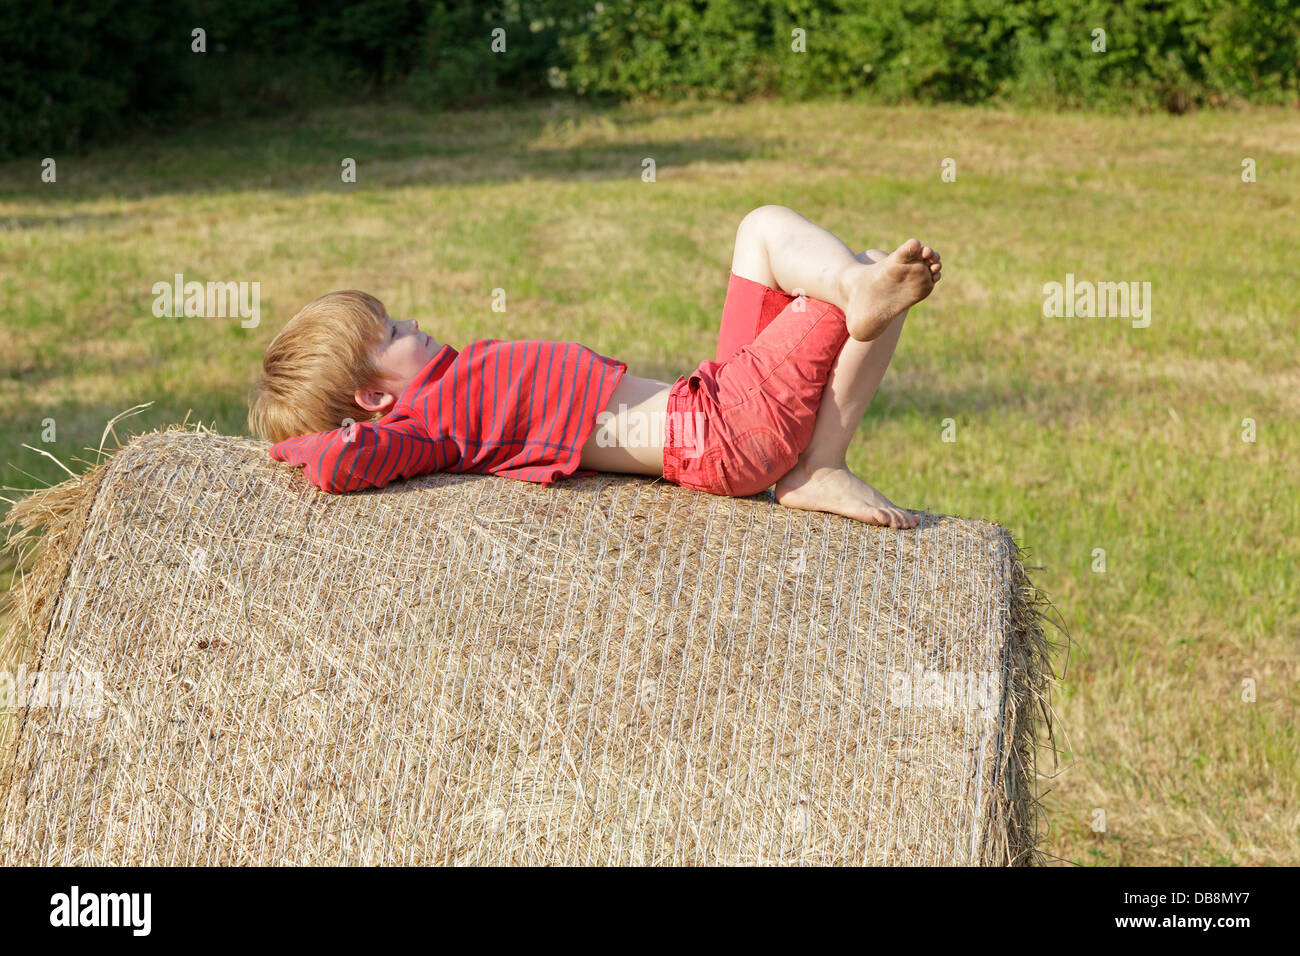 young boy resting on a bale of hay Stock Photo